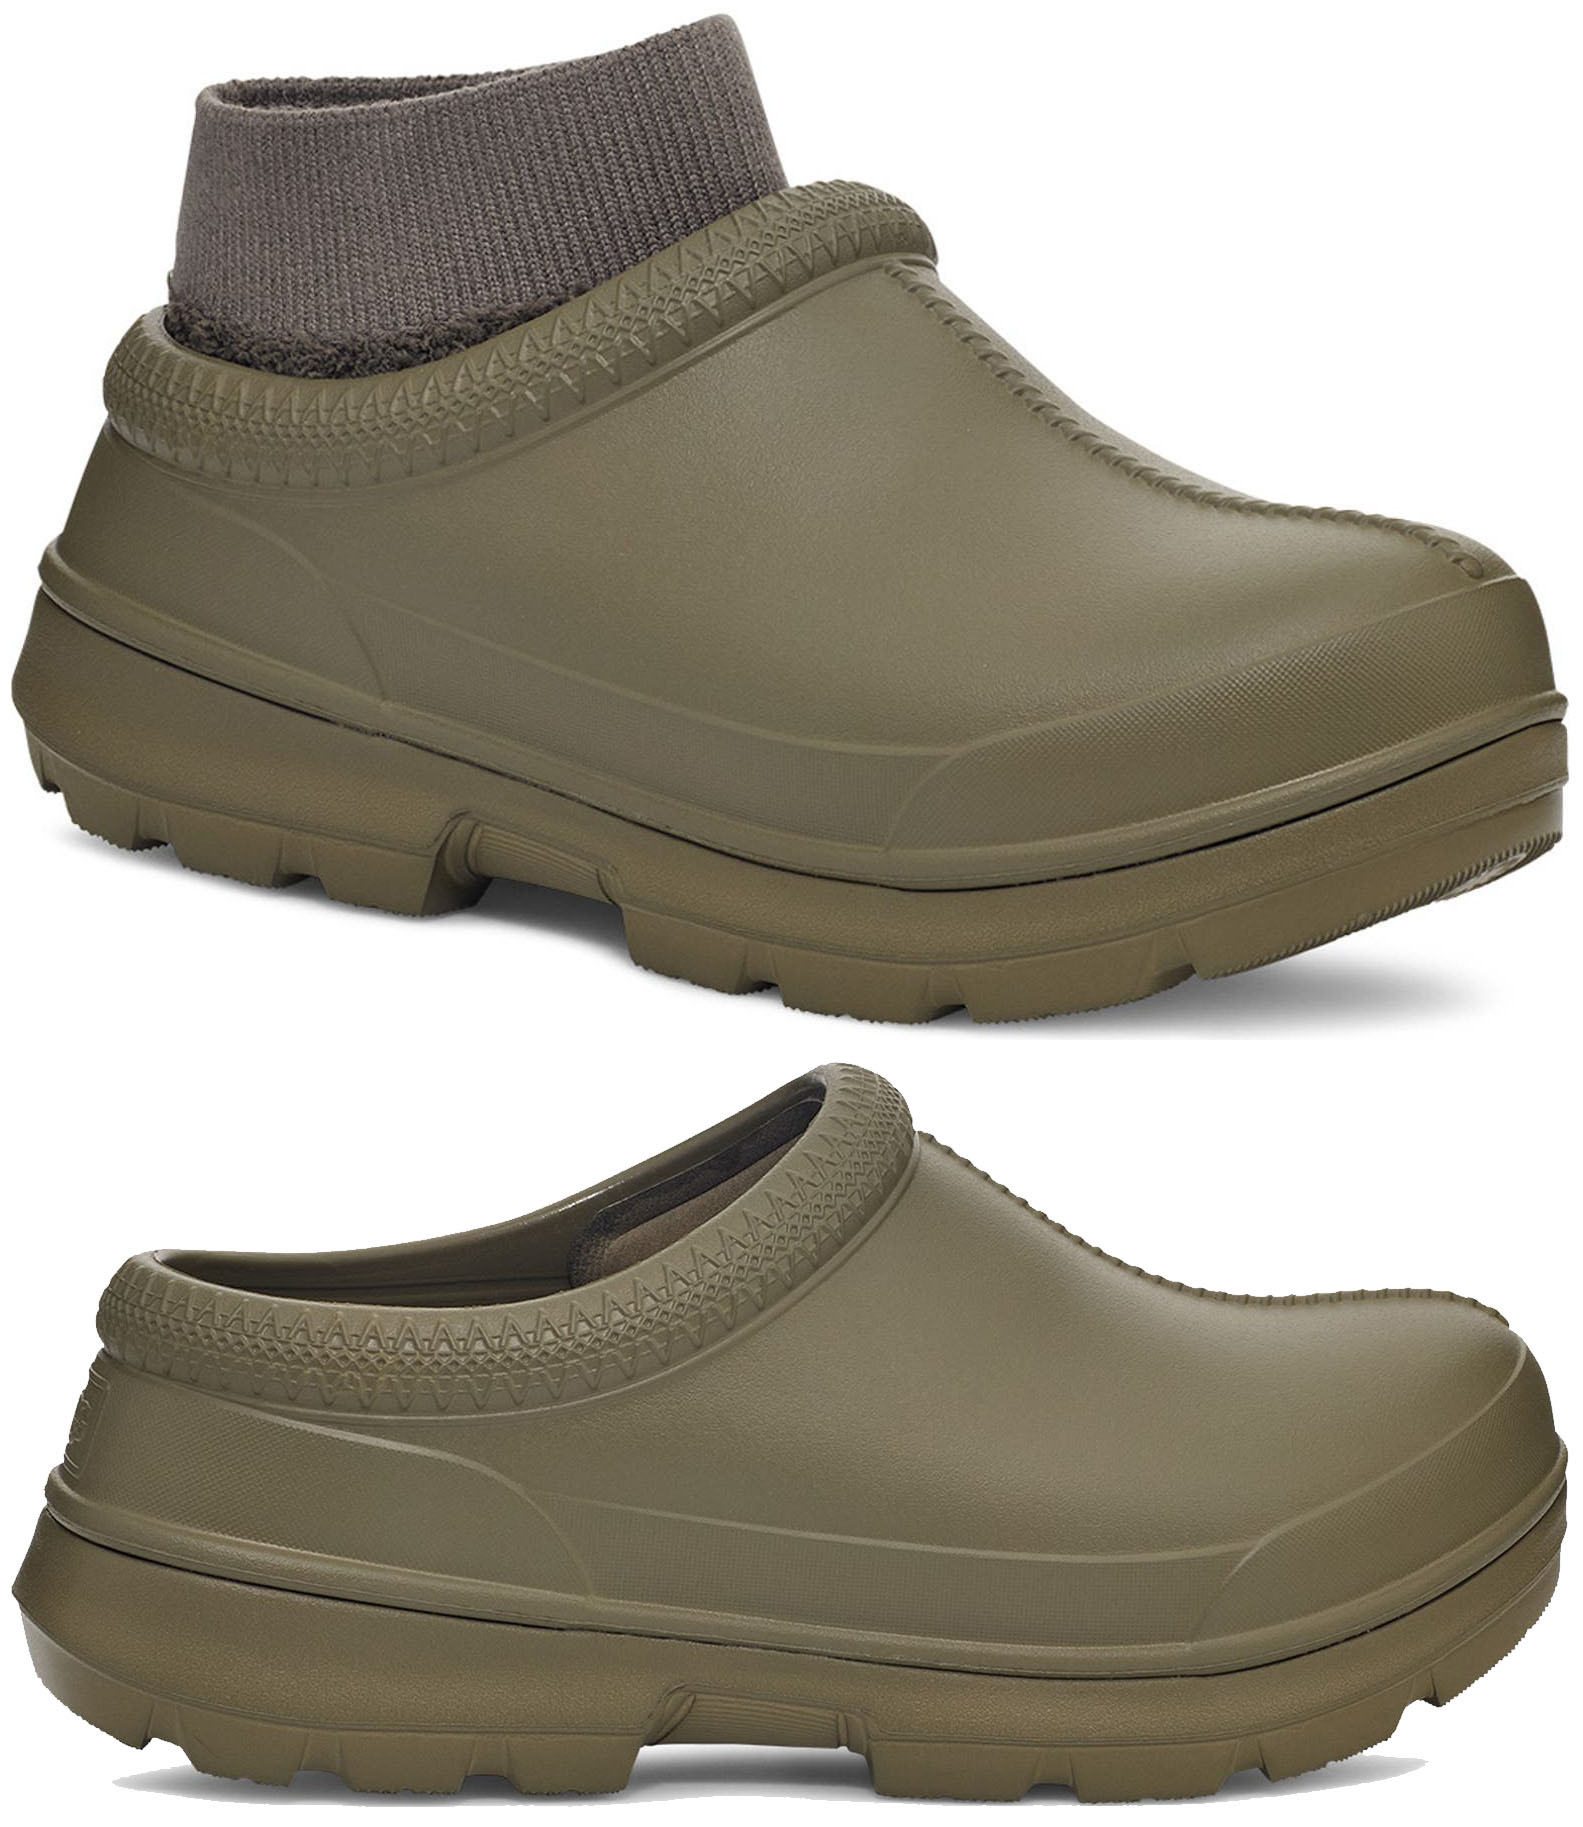 A sleek and waterproof clog, the UGG Tasman X is made from Treadlite by UGG foam and features a removable wool-rich blend sockliner